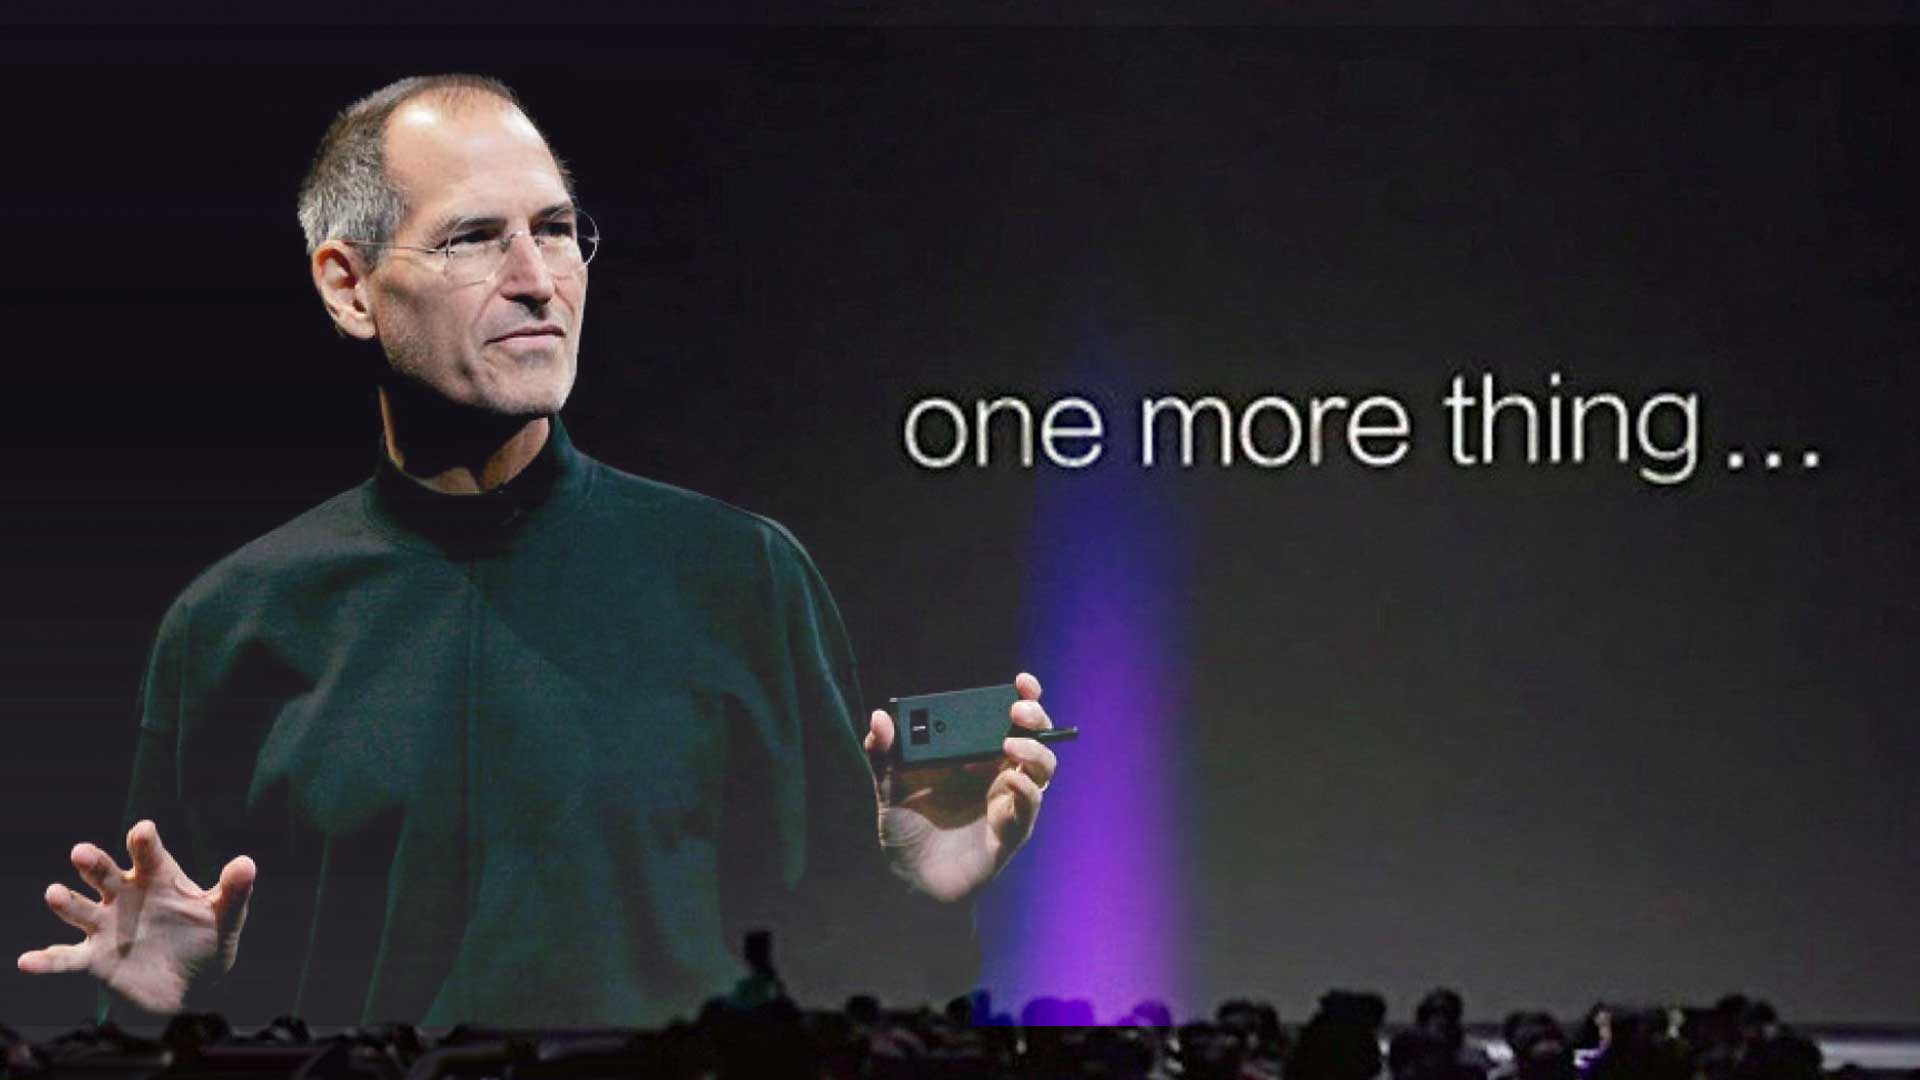 Steve jobs one more thing